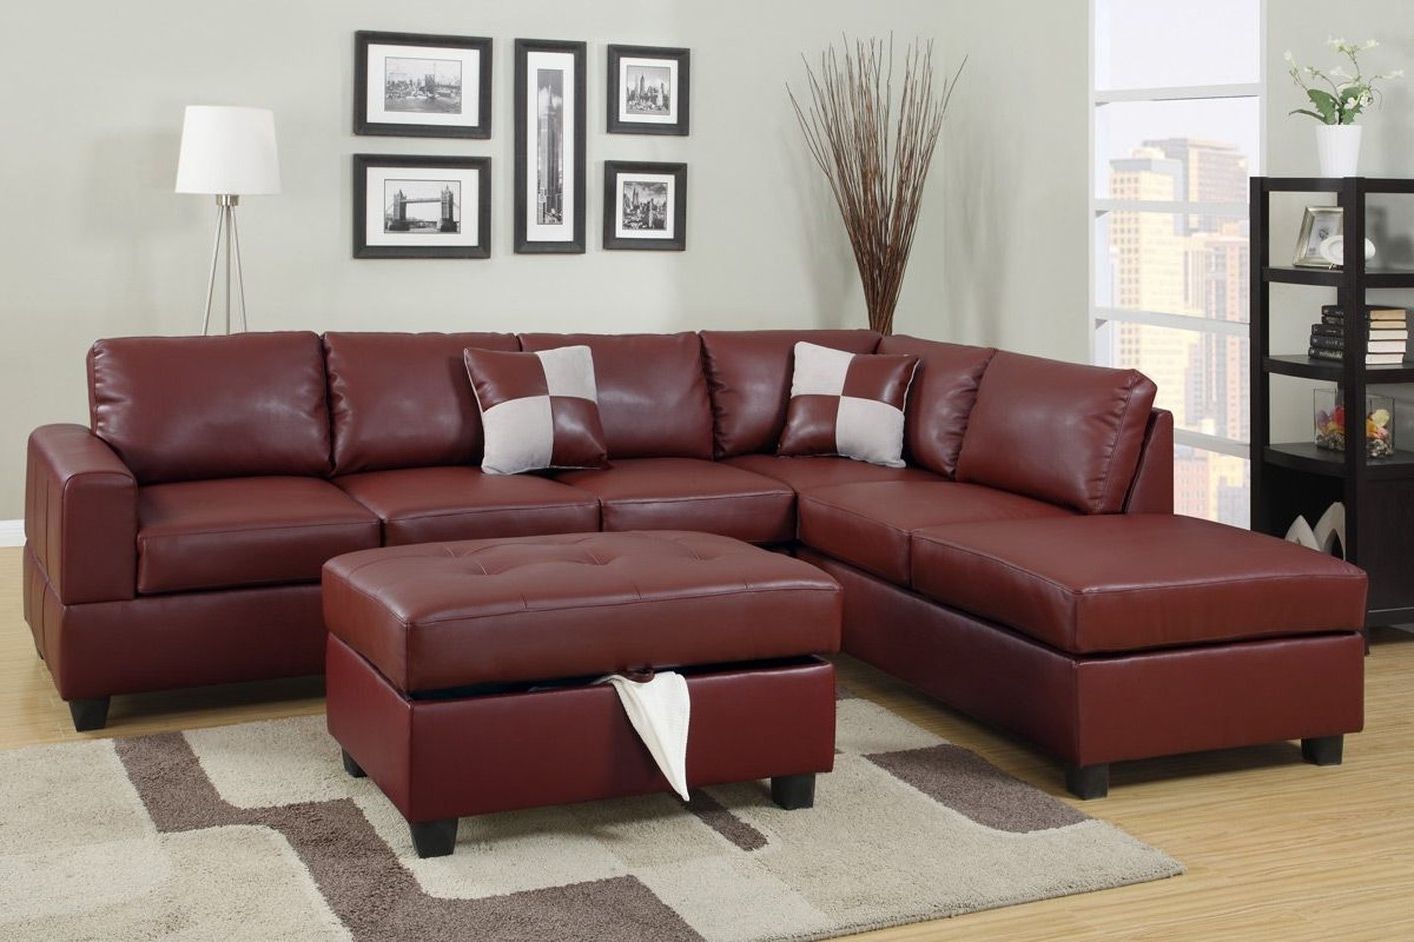 April Red Leather Sectional Sofa And Ottoman – Steal A Sofa For Current Red Leather Sectional Sofas With Ottoman (View 1 of 20)